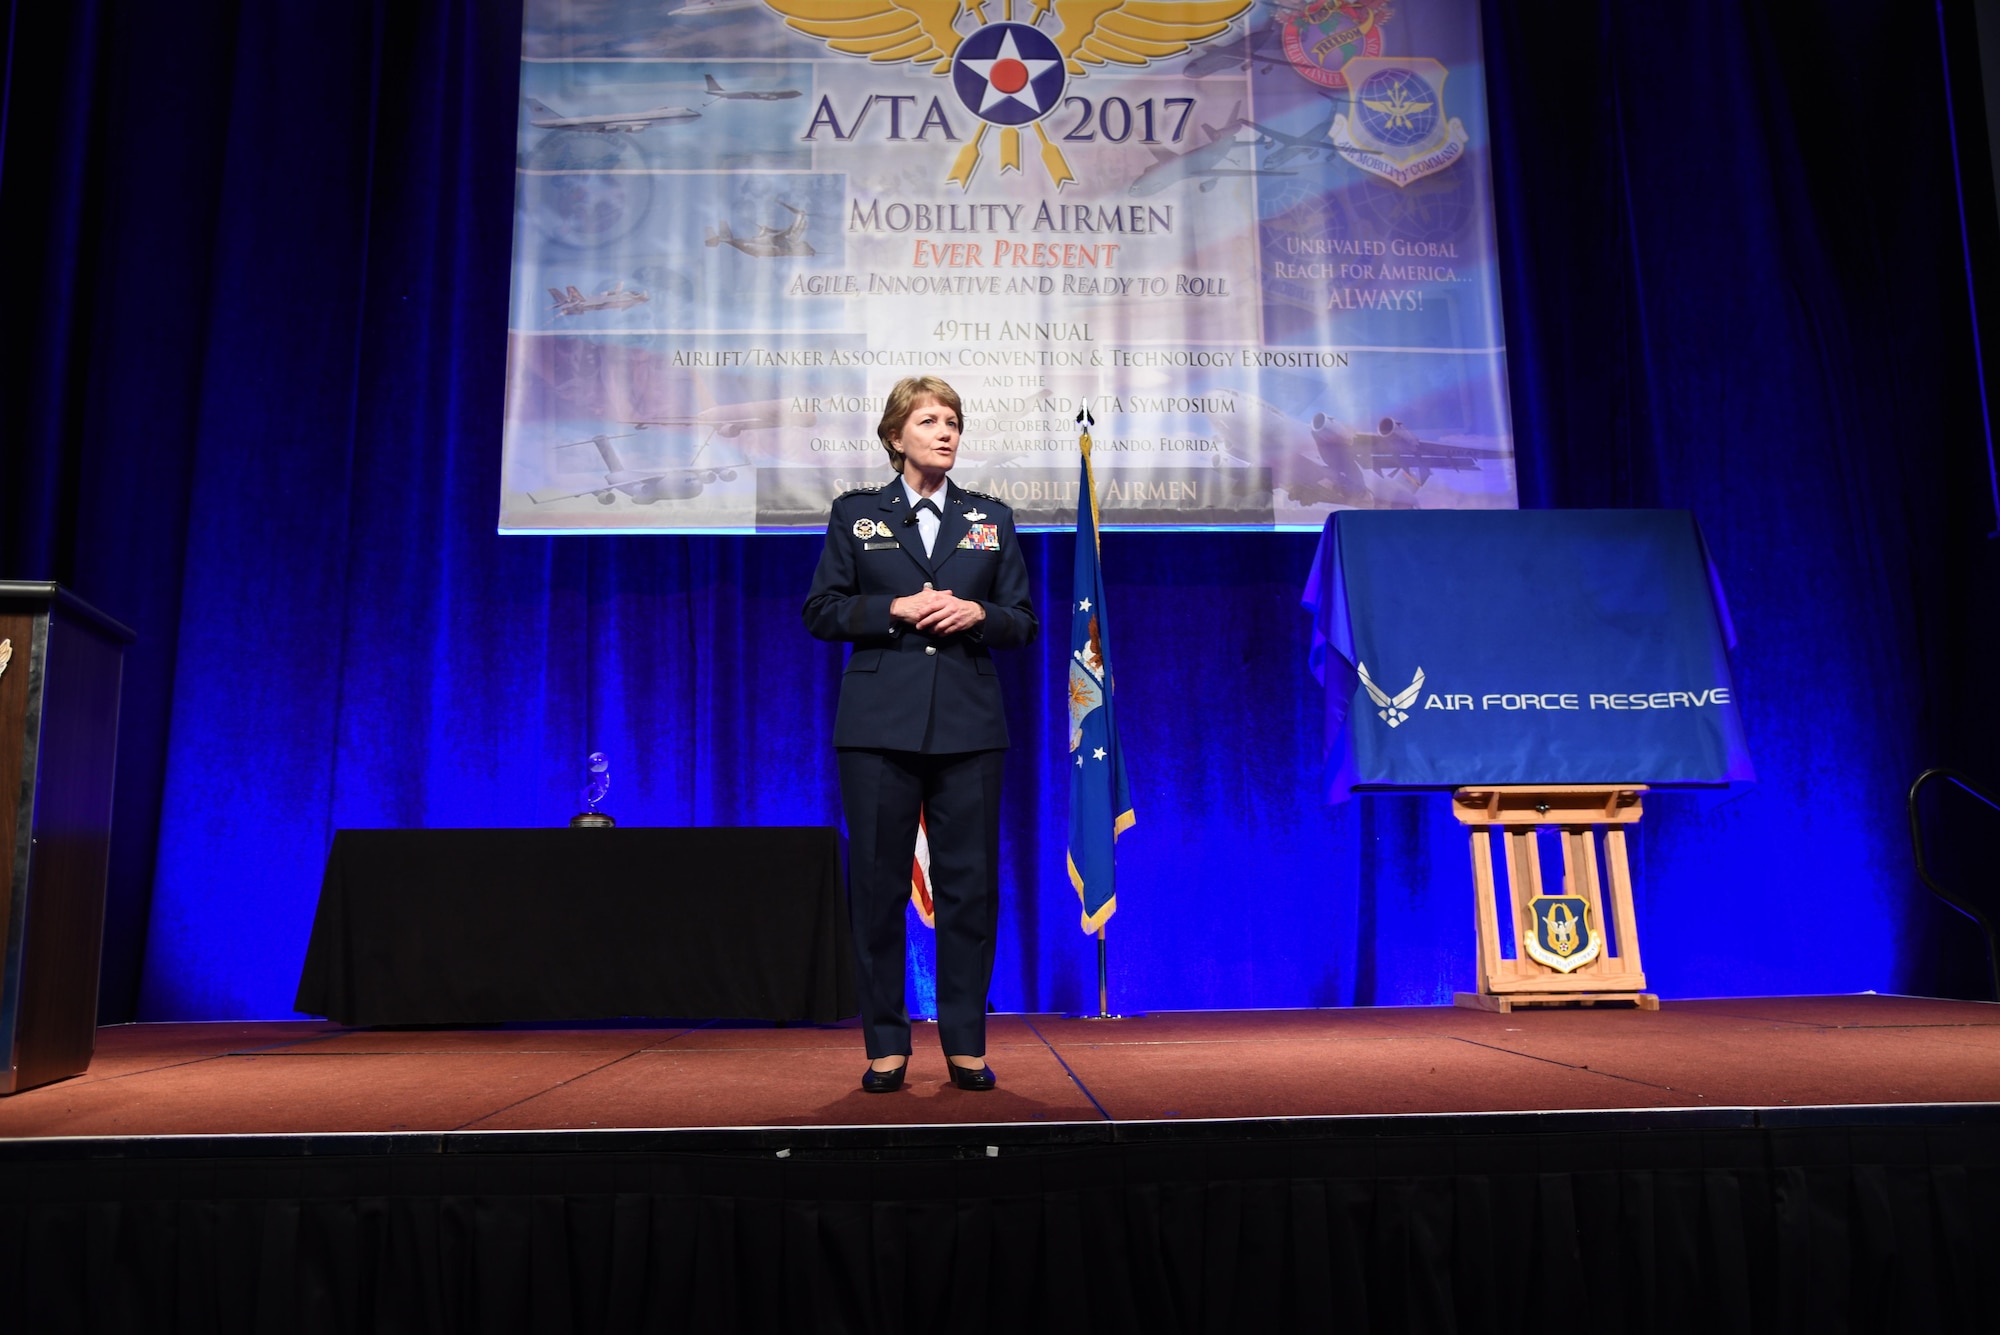 Lt. Gen. Maryanne Miller, chief of the Air Force Reserve and commander of Air Force Reserve Command, traveled to Orlando, Florida to share stories and to praise the accomplishments of Reserve Citizen Airmen with the attendees of the 49th Air Mobility Command and Airlift/Tanker Association Symposium, held Oct. 26 through Oct. 29. The ATA gathered total-force Airmen and civilians, community leaders, and industry experts to promote education, understanding, and professional development in the mobility air force's mission. (U.S. Air Force photo by Tech. Sgt. Peter Dean)